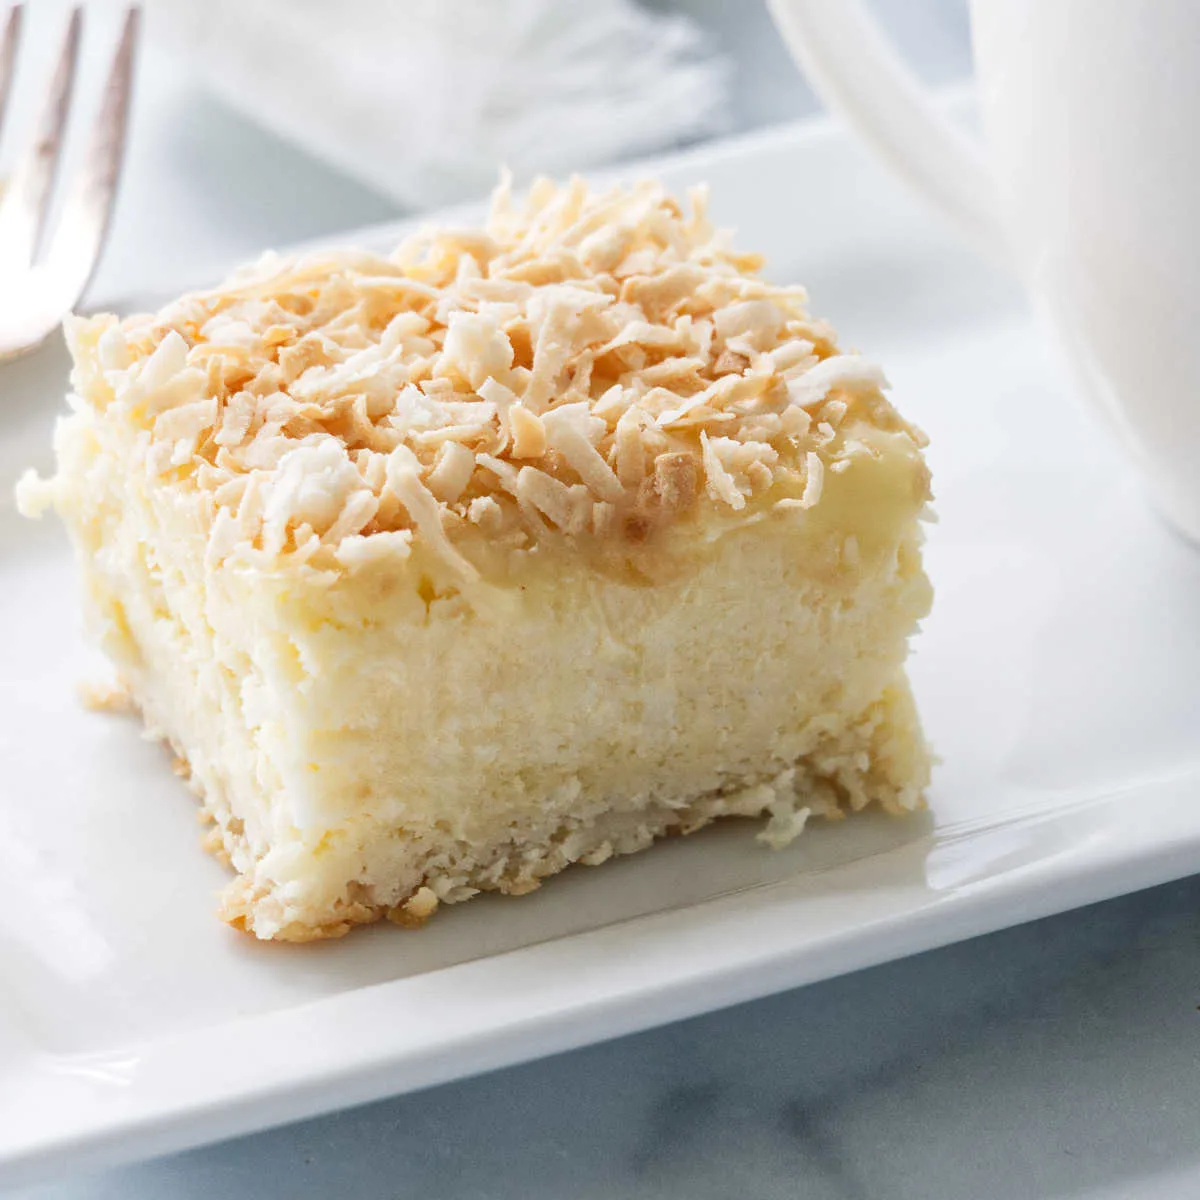 A creamy coconut cheesecake bar on a plate with coffee.